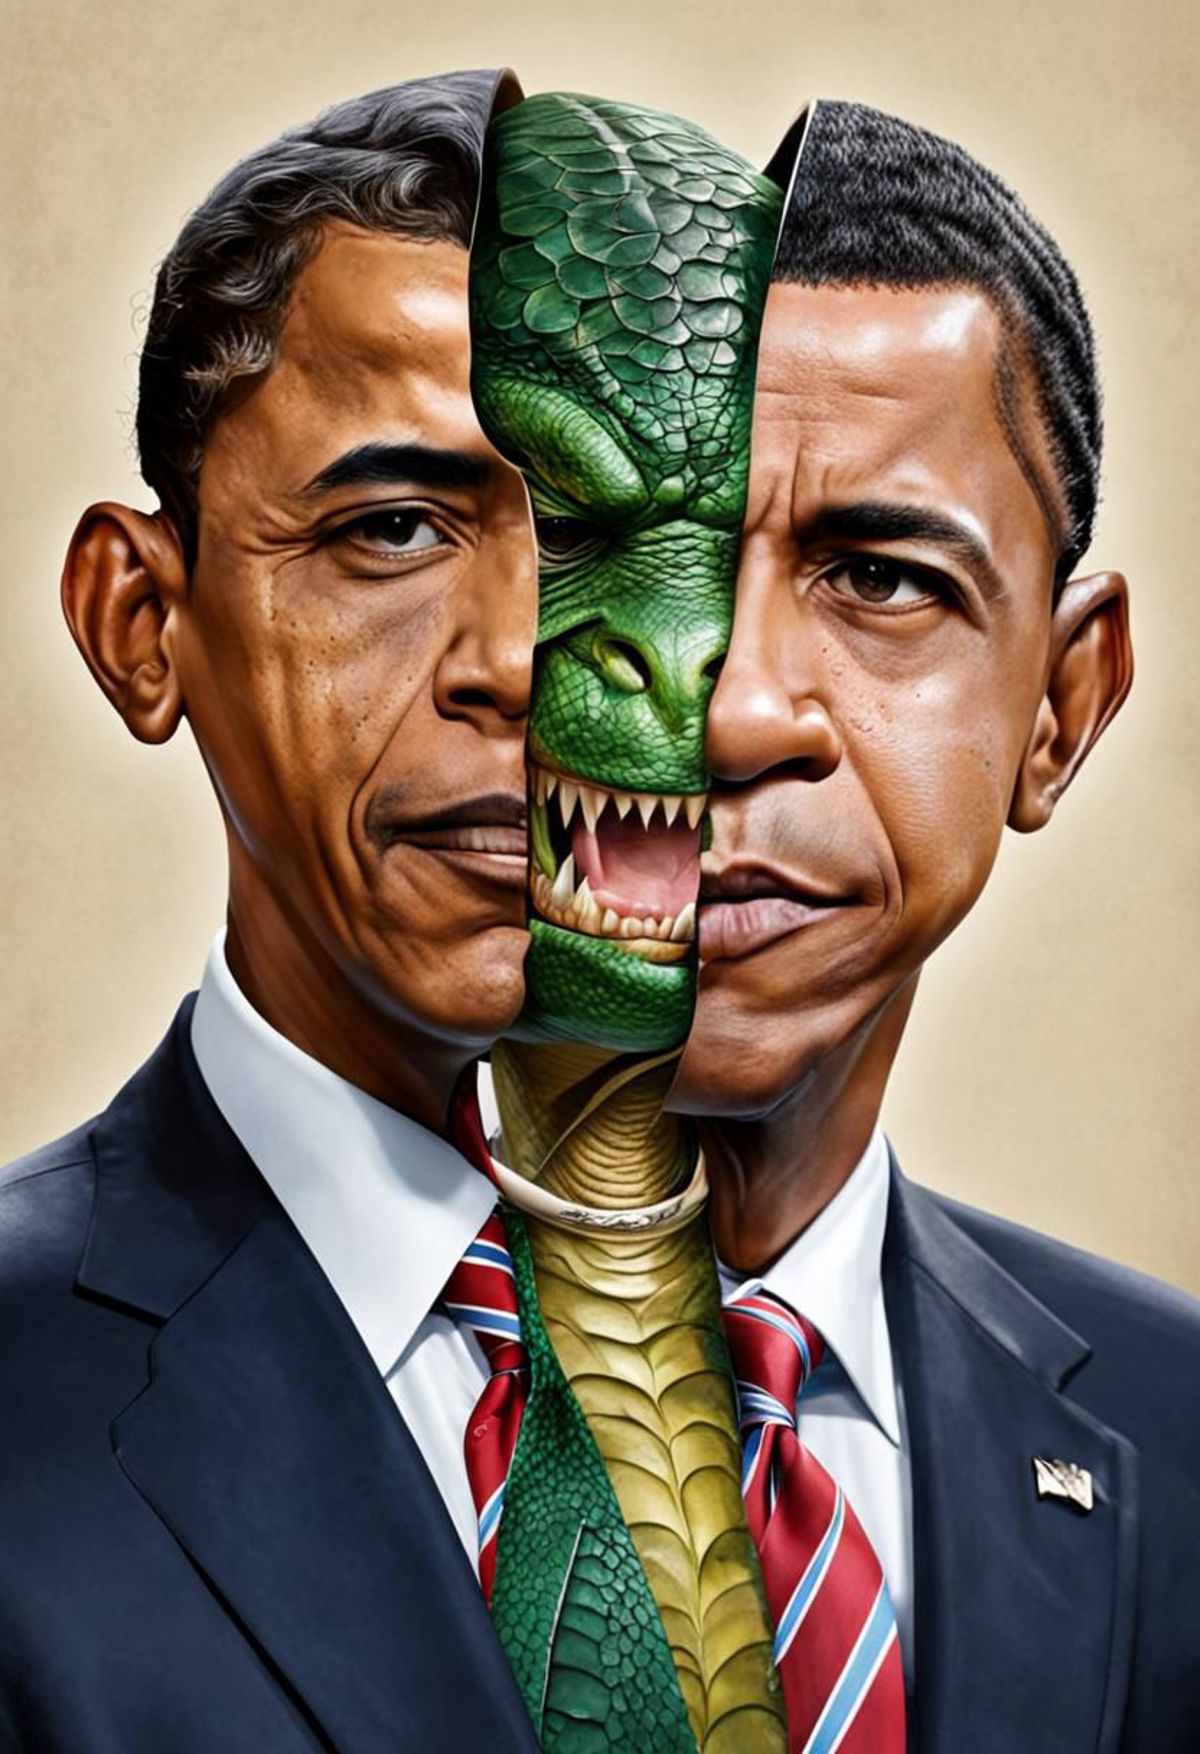 A mashup of Obama and a snake, with the snake's mouth covering the president's face.